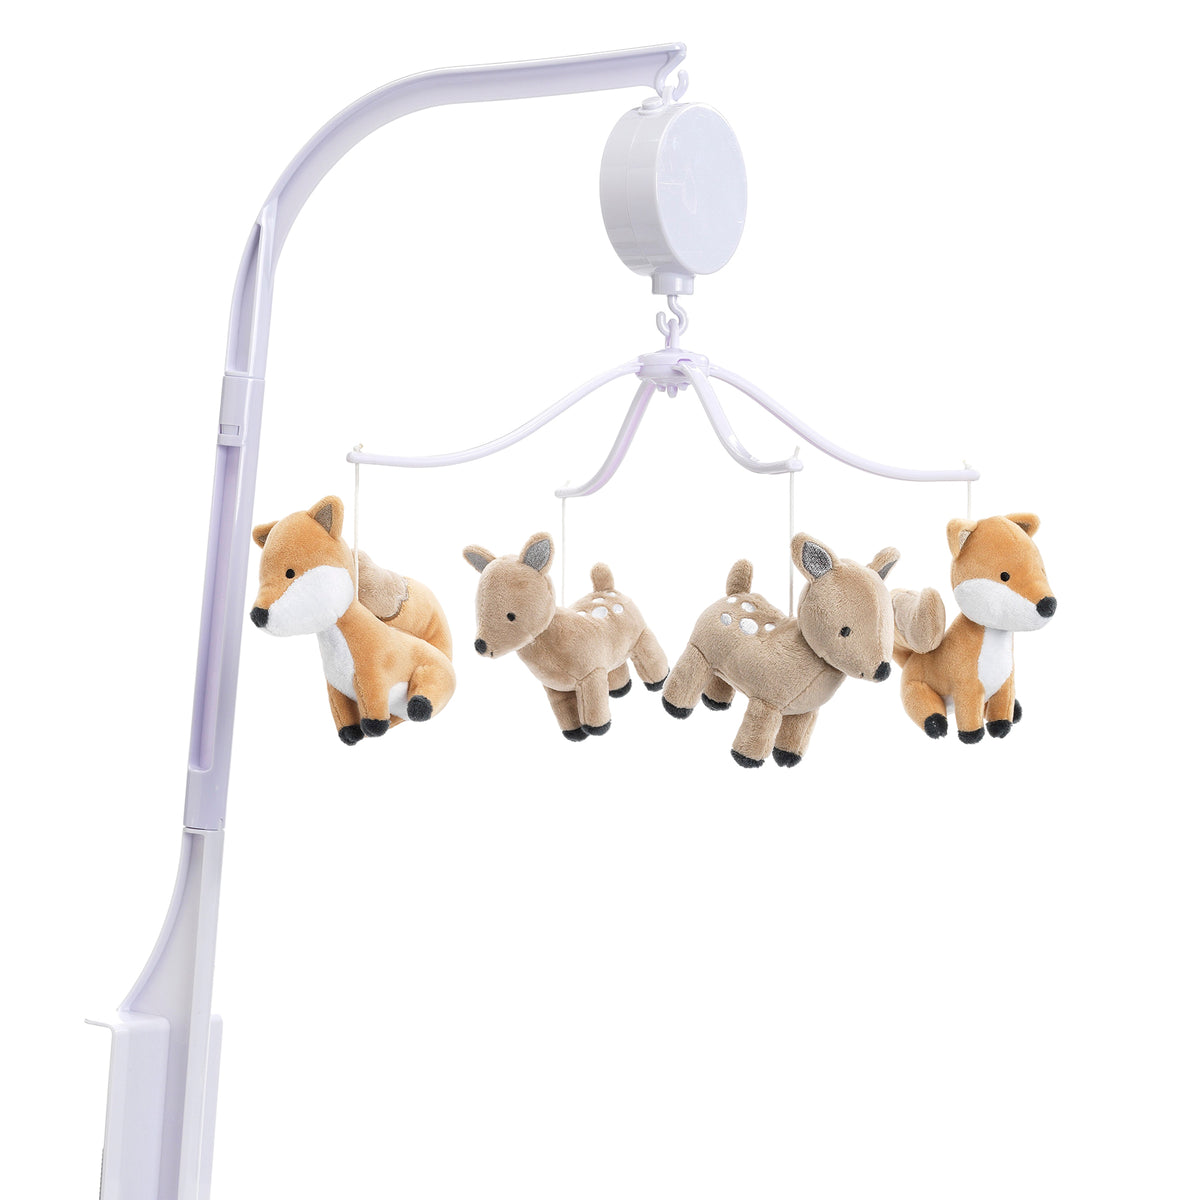 Autumn woodland Crib mobile, Baby mobile with forest animals